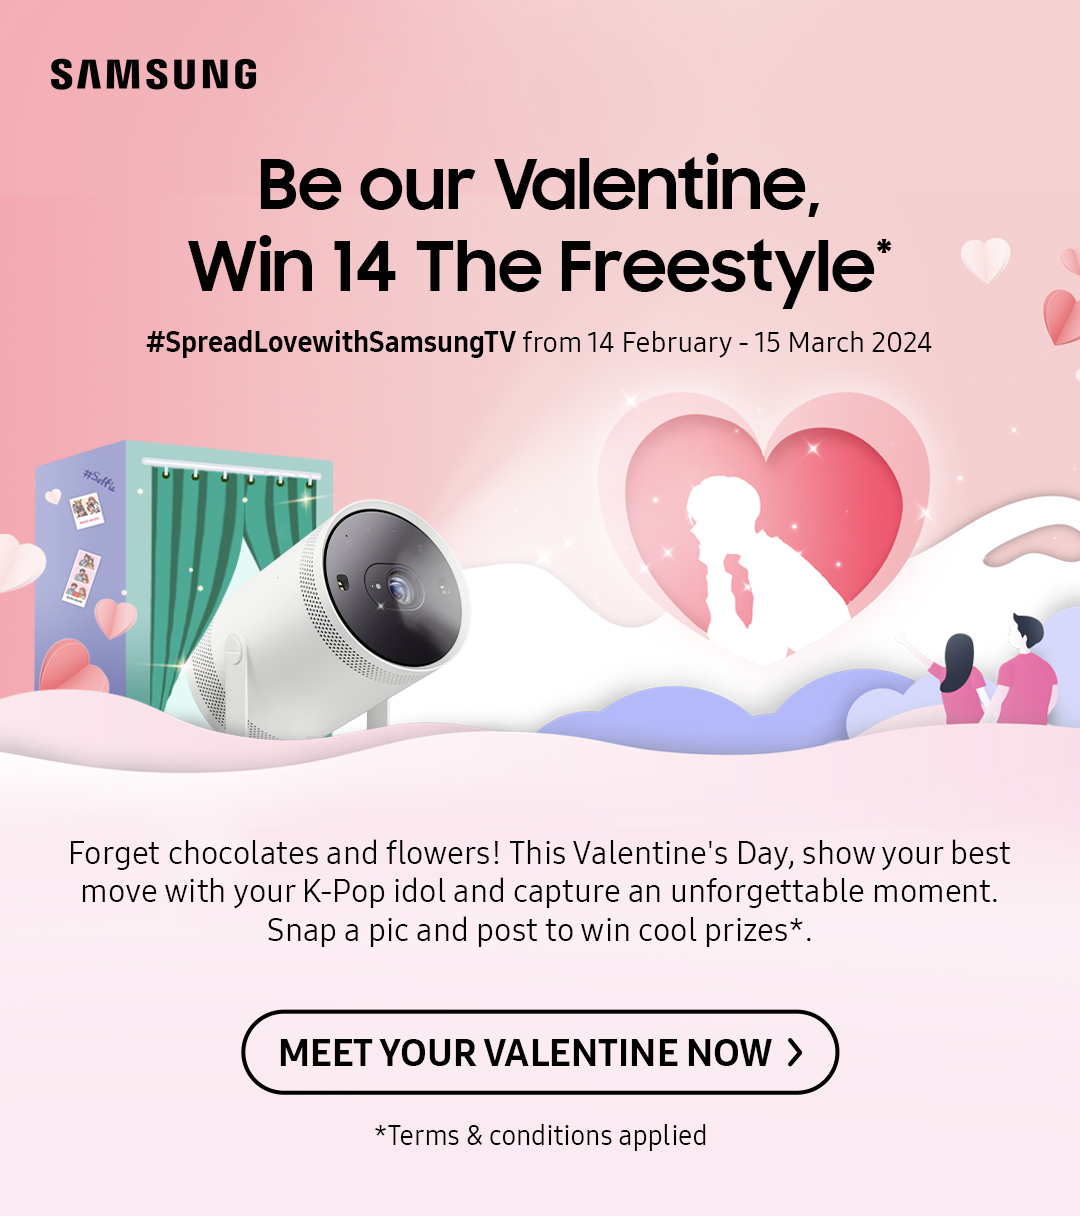 Be our Valentine, Win 14 The Freestyle* | Forget chocolates and flowers! This Valentine's Day, show your best move with your K-Pop idol and capture an unforgettable moment. Snap a pic and post to win cool prizes*